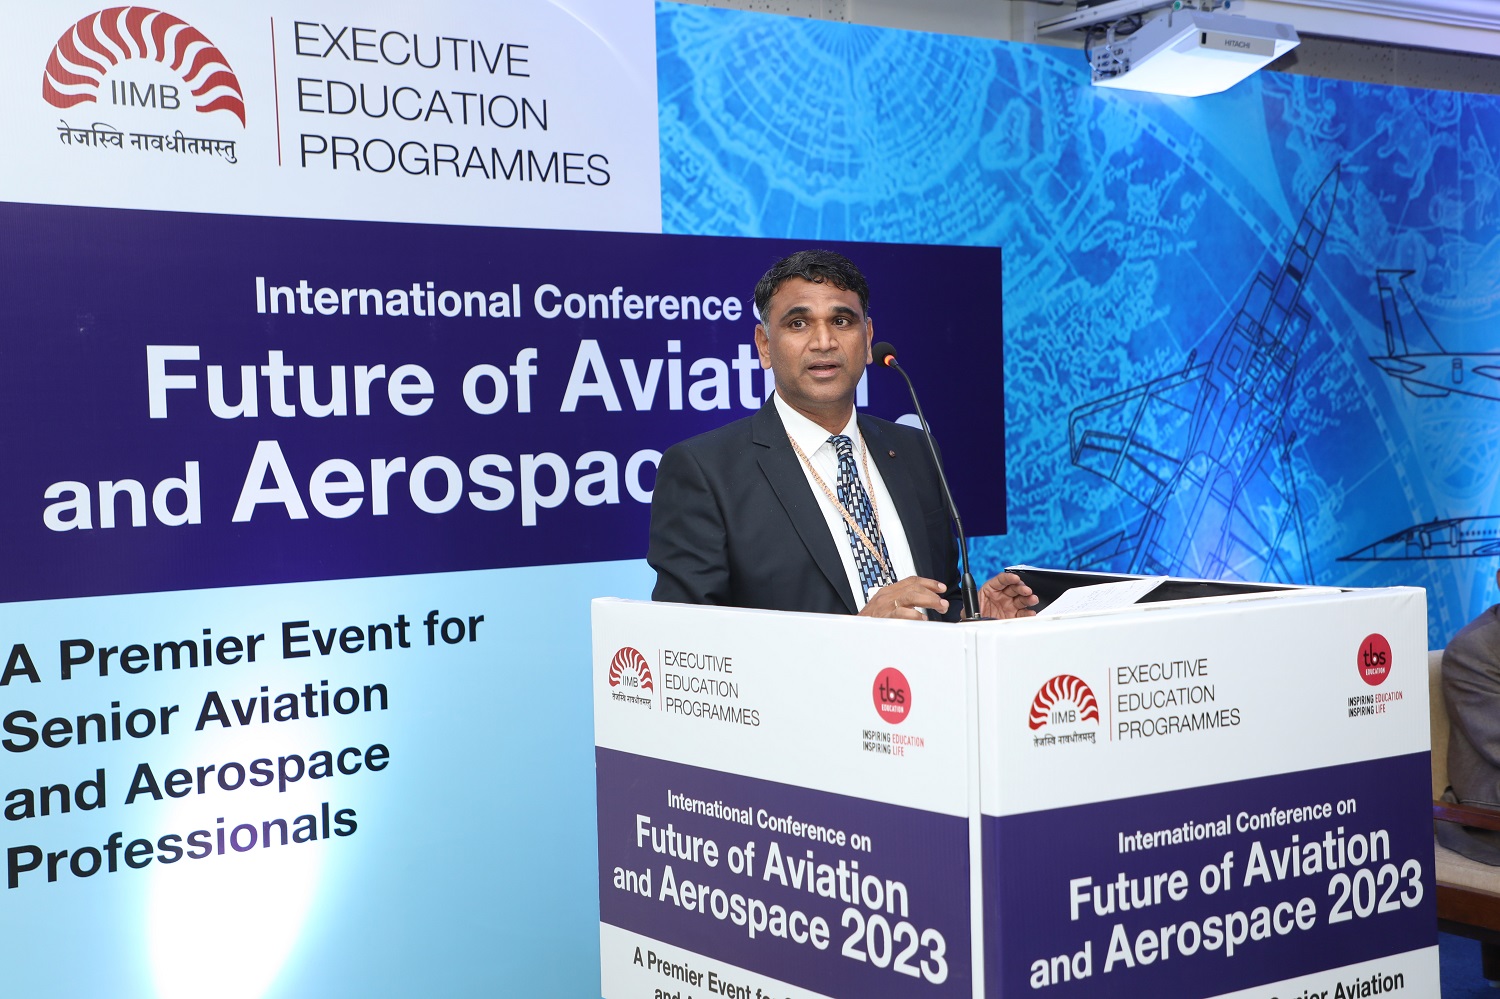 Mr. Uma Maheshwar D, Chief Consulting Engineer, GE Aviation, spoke on 'Future of Technology in Aerospace: Start-ups and Make in India Policy' at FOAA 2023.